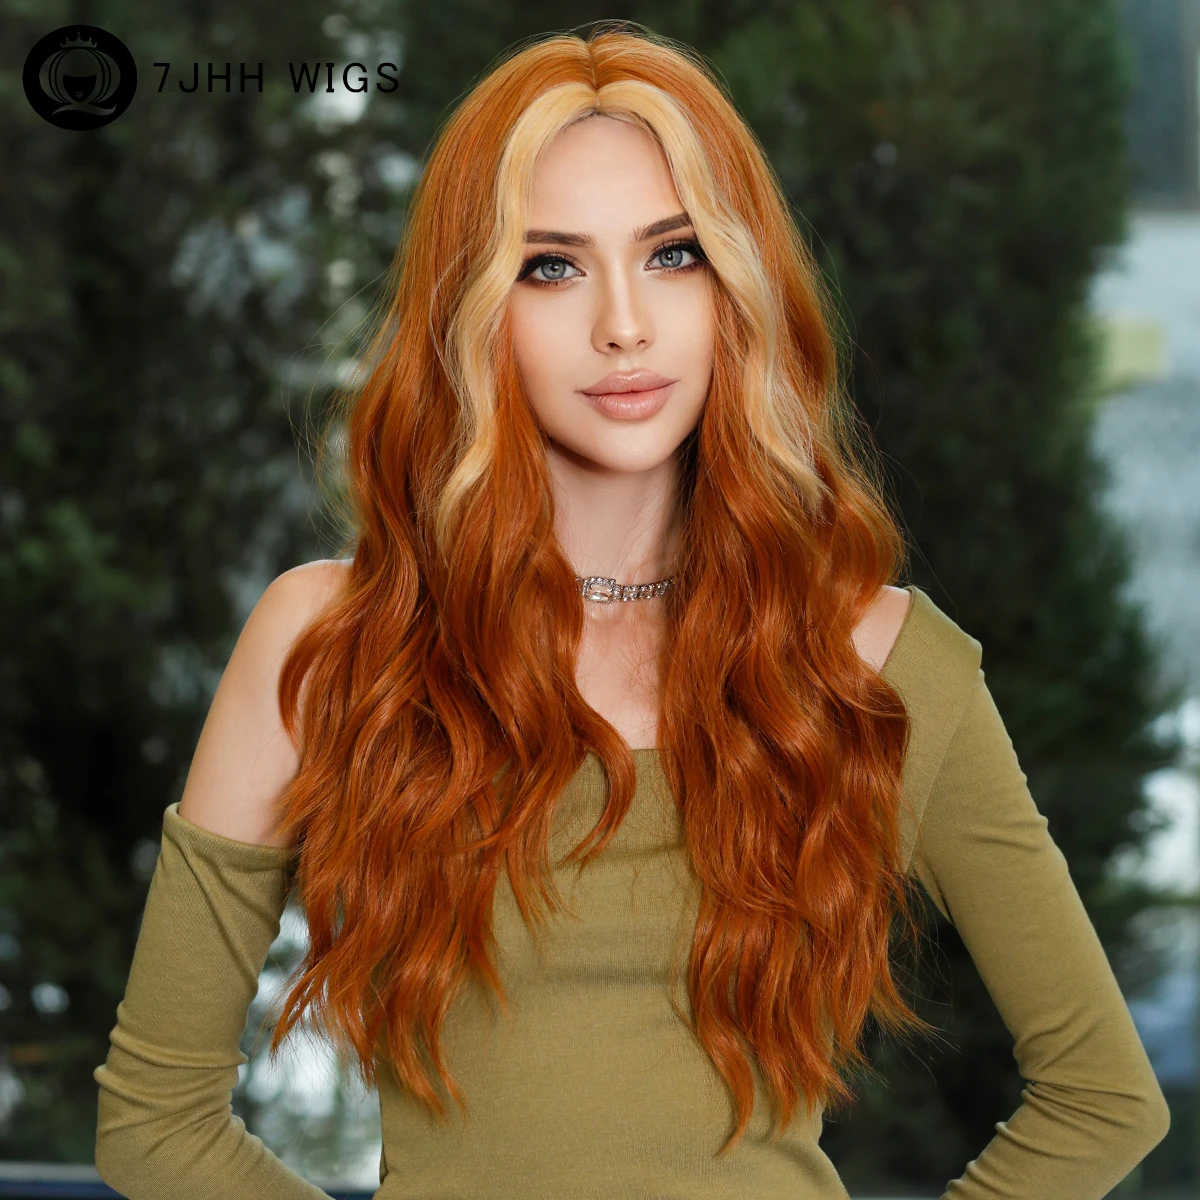 

Skunk Water Wave Wig Synthetic Curly Wig for Women Long Deep Wave Wig Natural Light Brown with Ginger Orange Highlights Hair